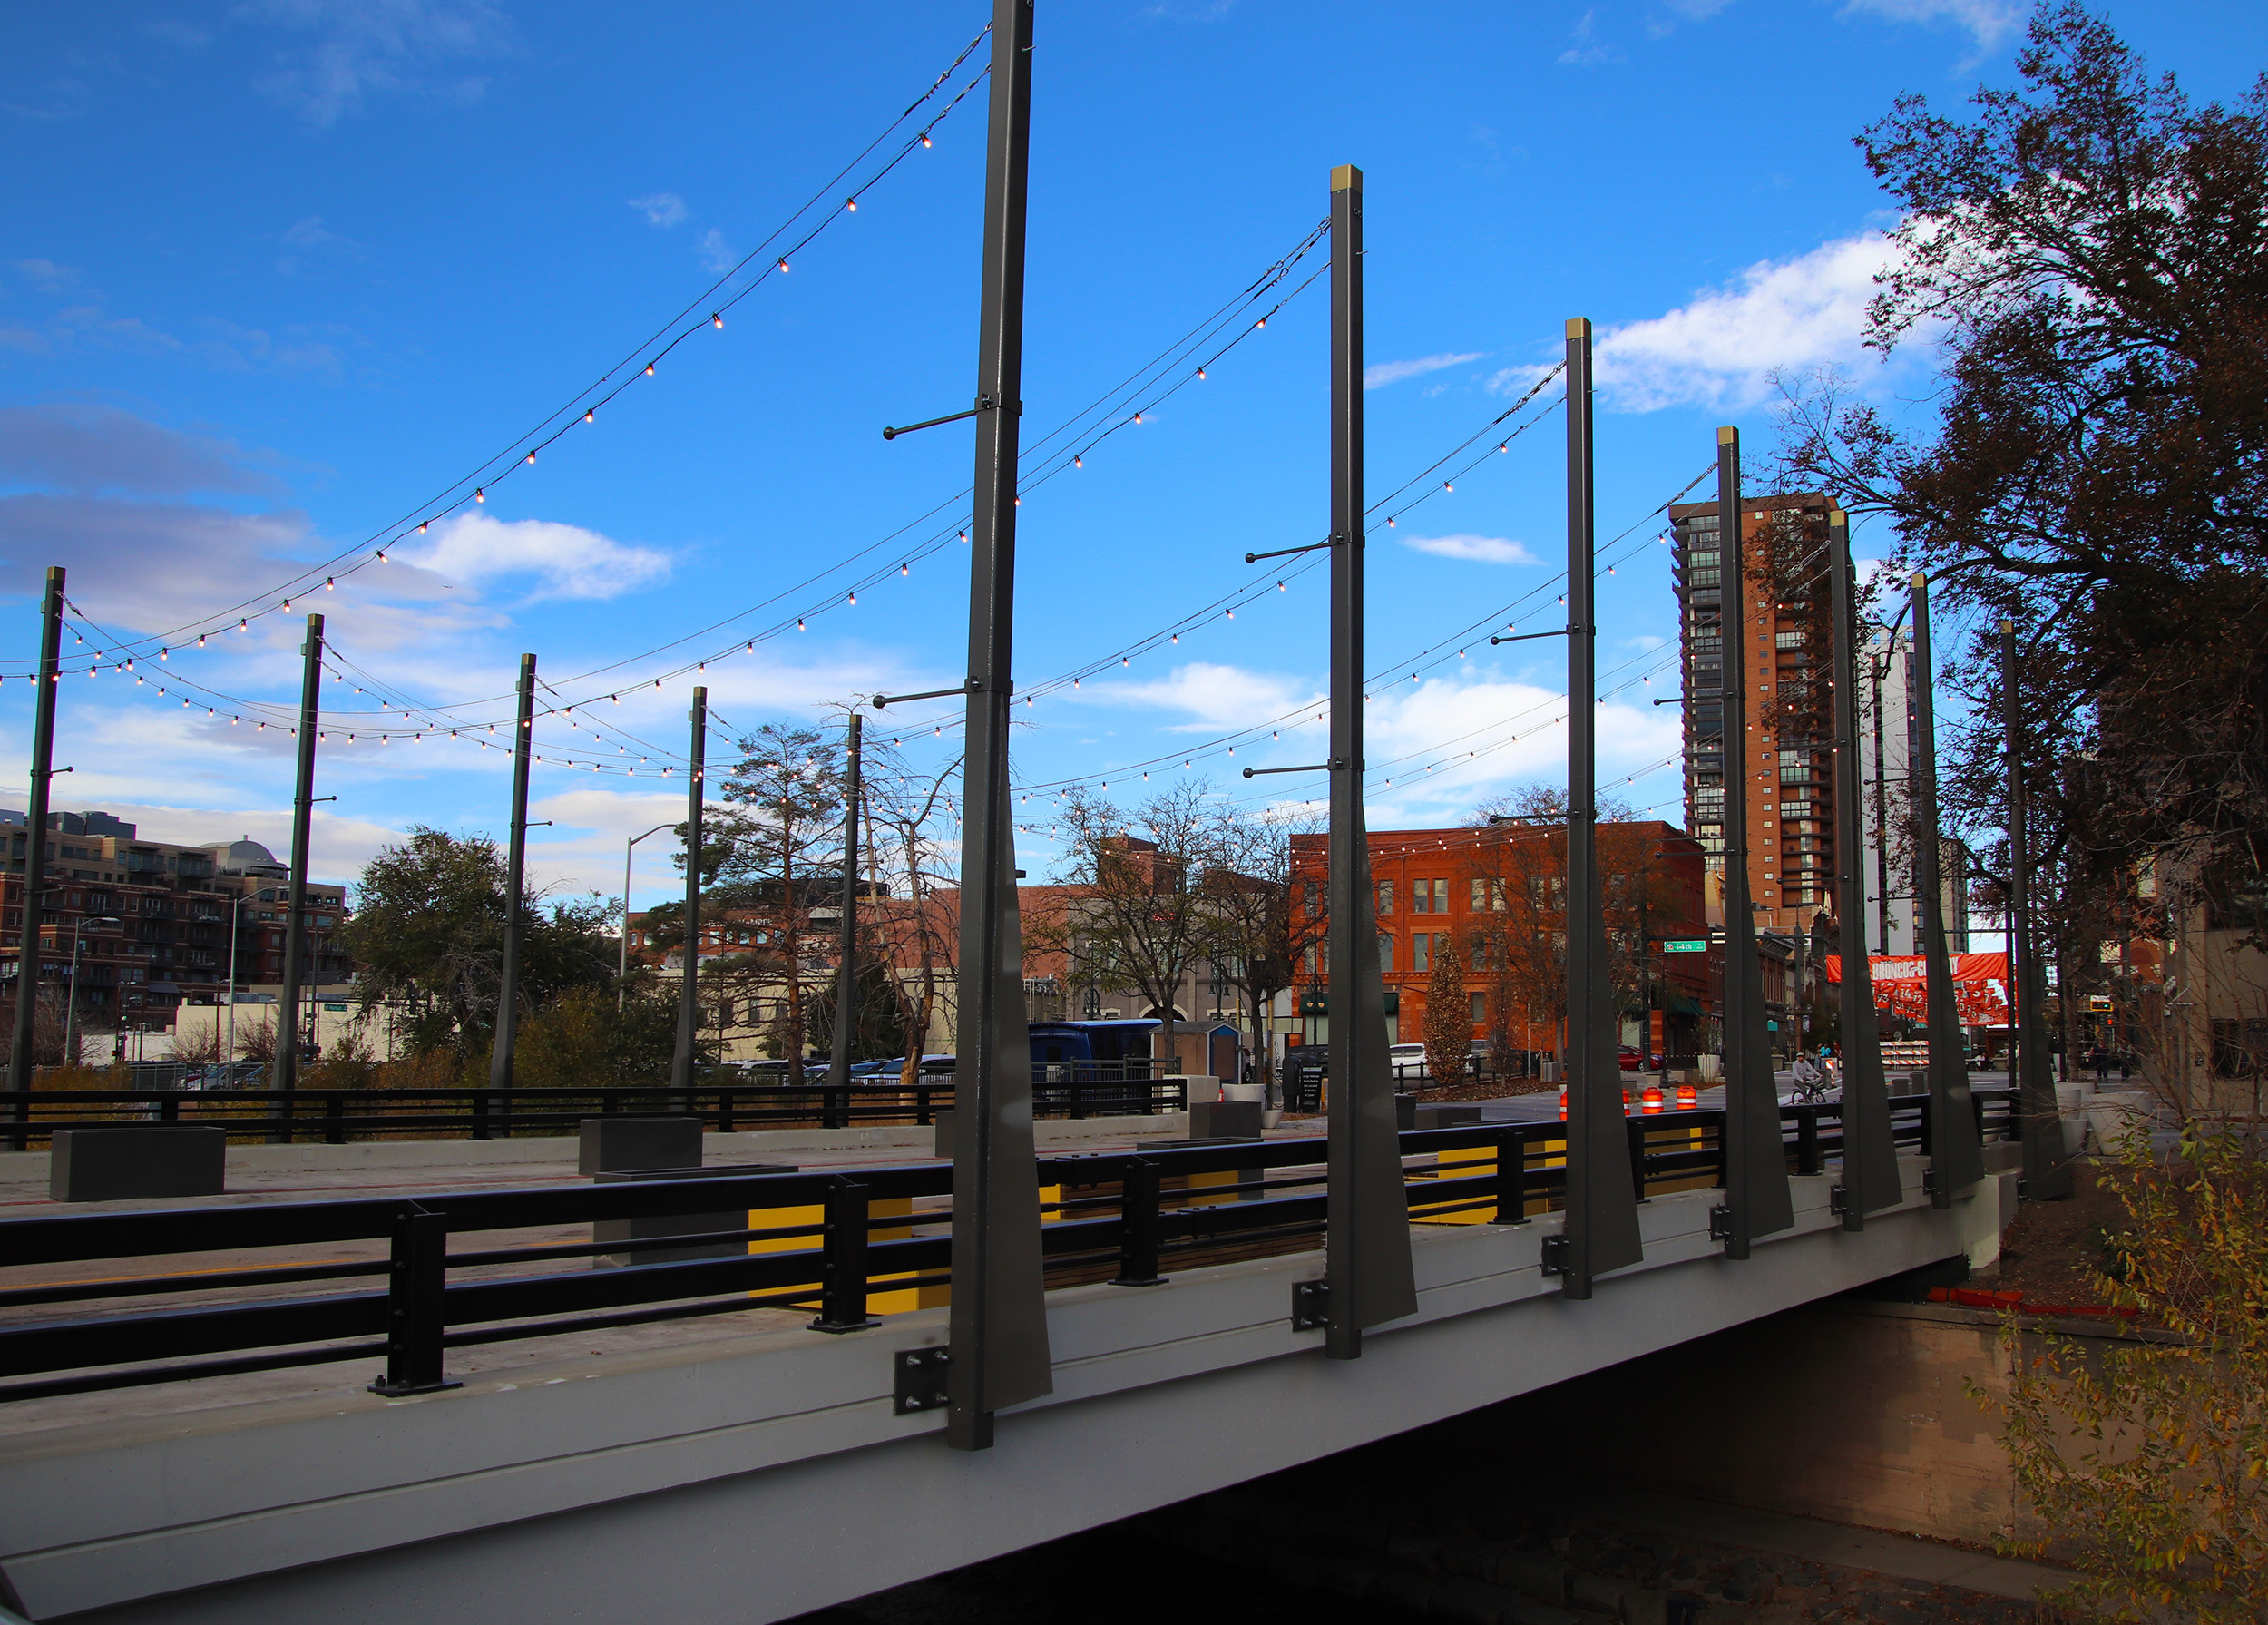 The Connecting Auraria project replaced the aging Larimer Street bridge over Cherry Creek and improved the roadway for all modes of travel.